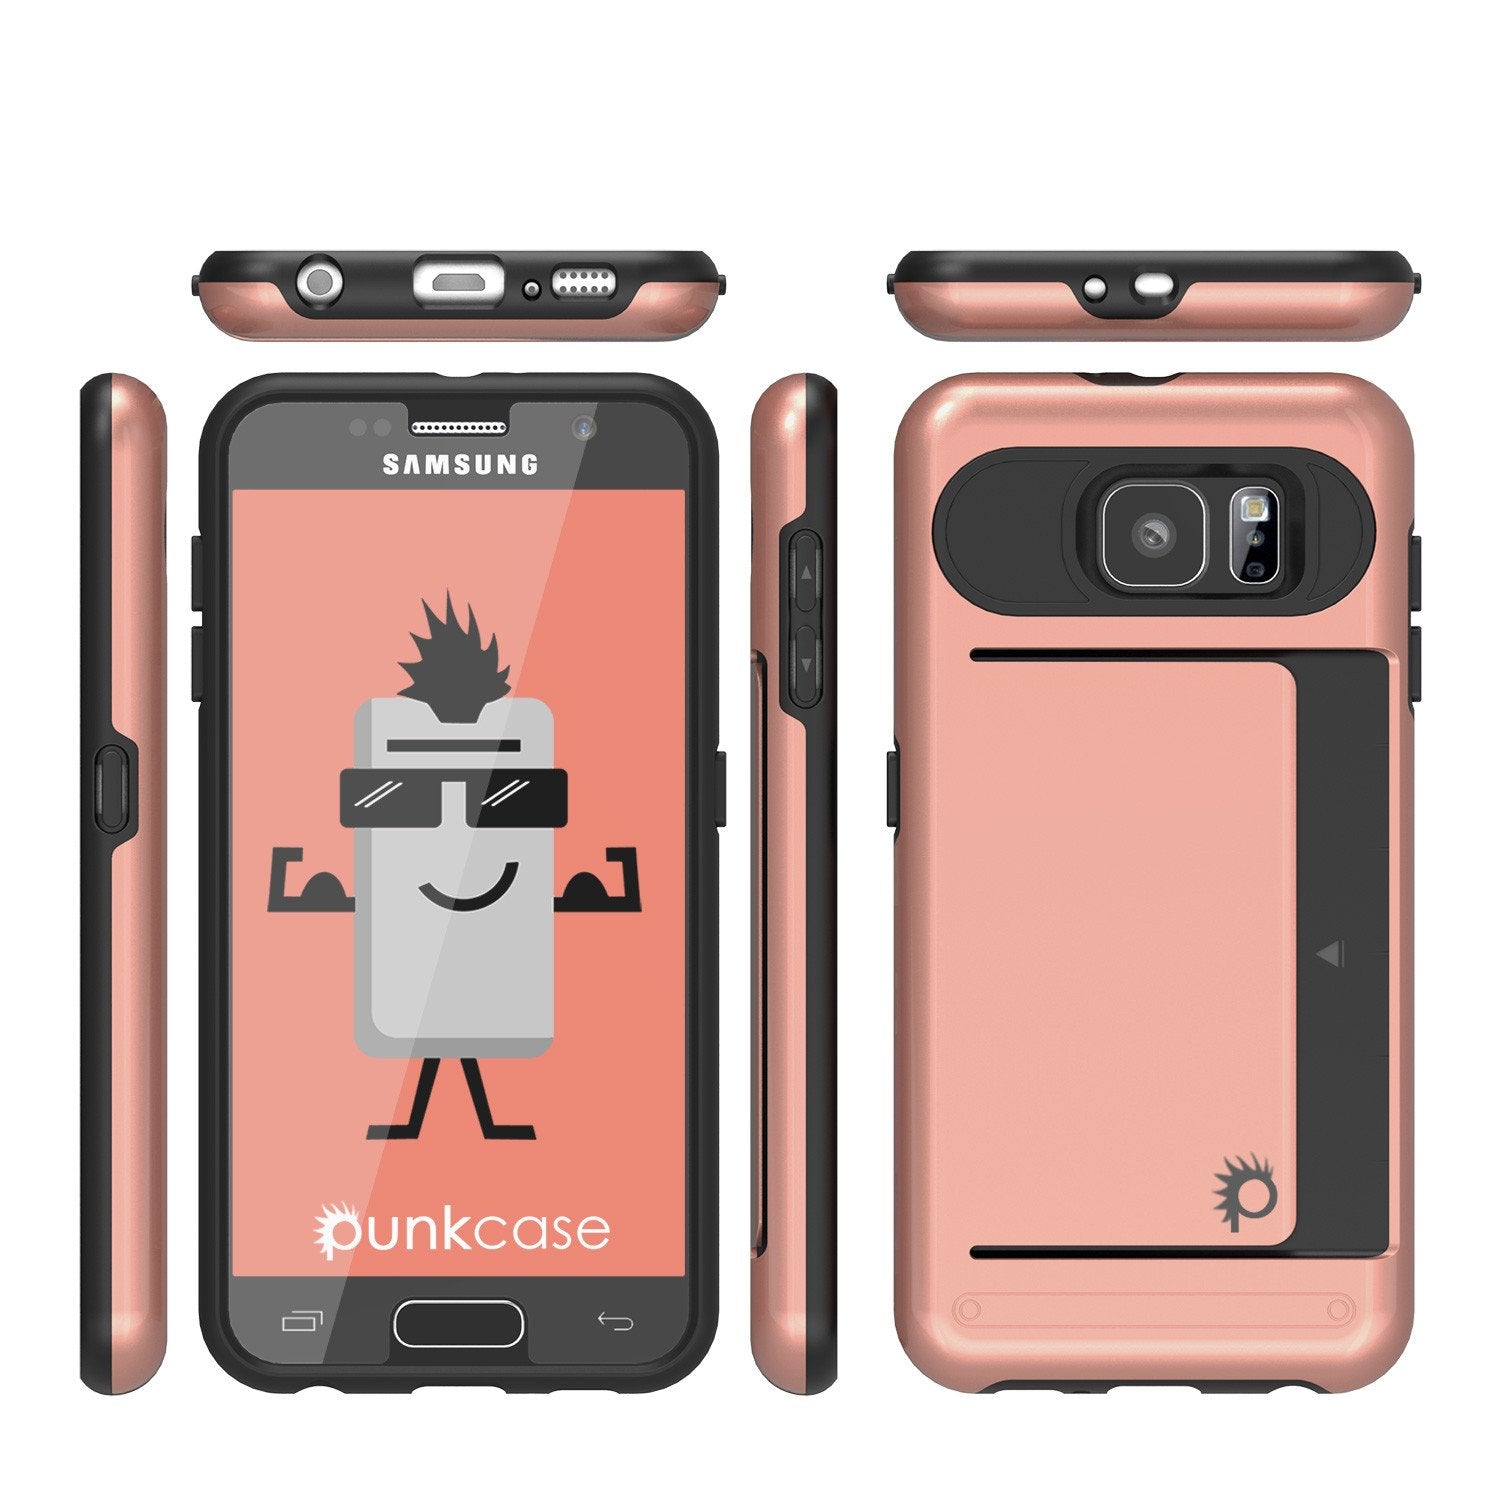 Galaxy s6 Case PunkCase CLUTCH Rose Gold Series Slim Armor Soft Cover Case w/ Tempered Glass - PunkCase NZ